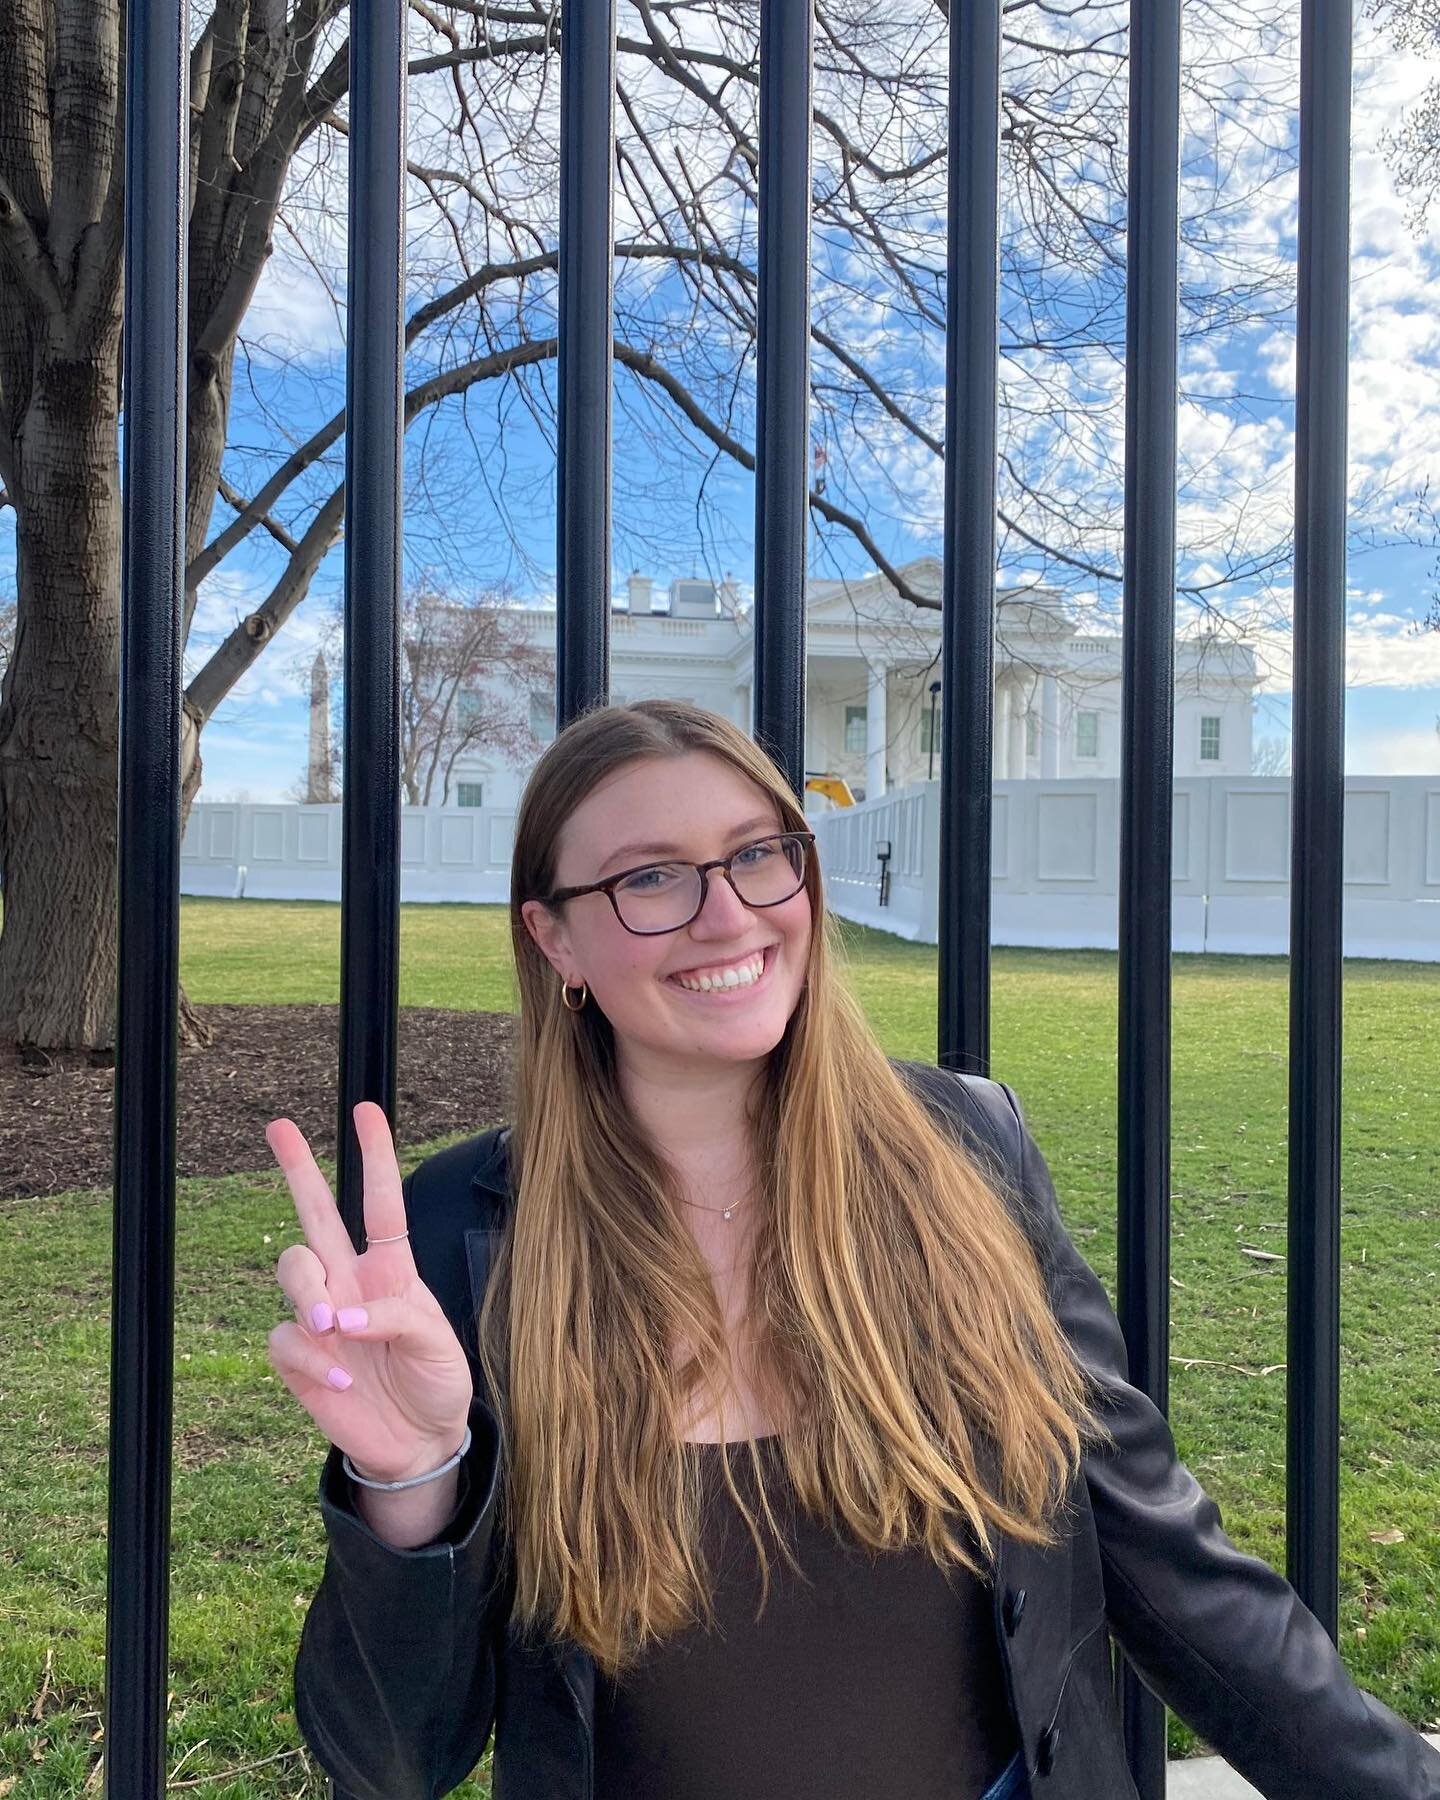 New Blog Post! Ambassador Caitlin shares what her experience was like adjusting to USC as a Spring Admit and overcoming the anxiety that came with it. She shares honest insights as to what was most challenging about the transition and how she found h